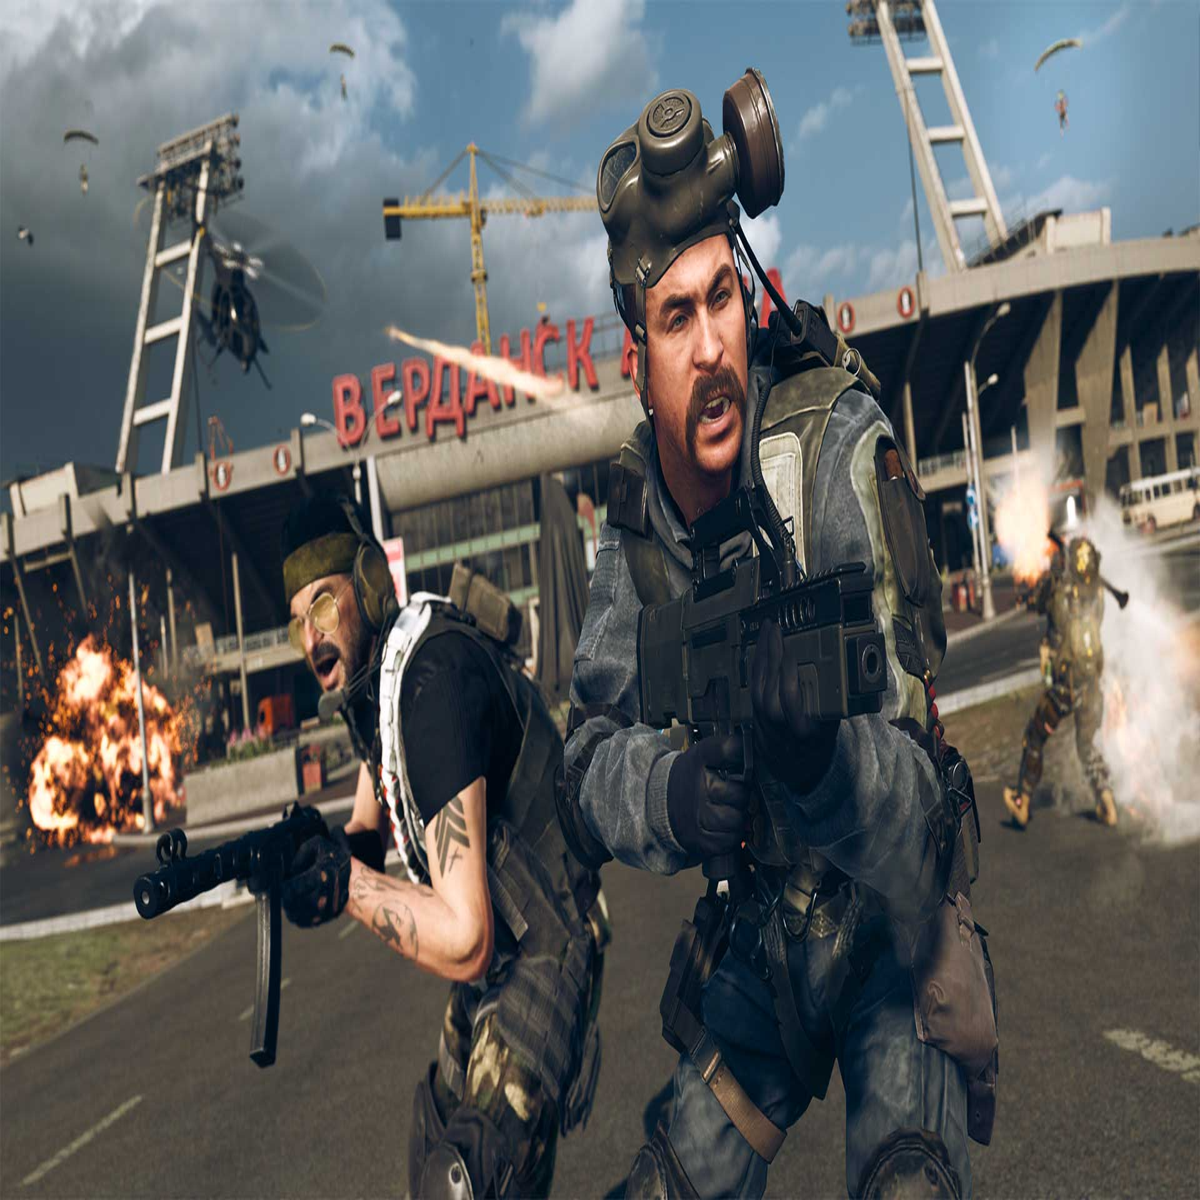 Call Of Duty 2023 is full game claims report – maybe Modern